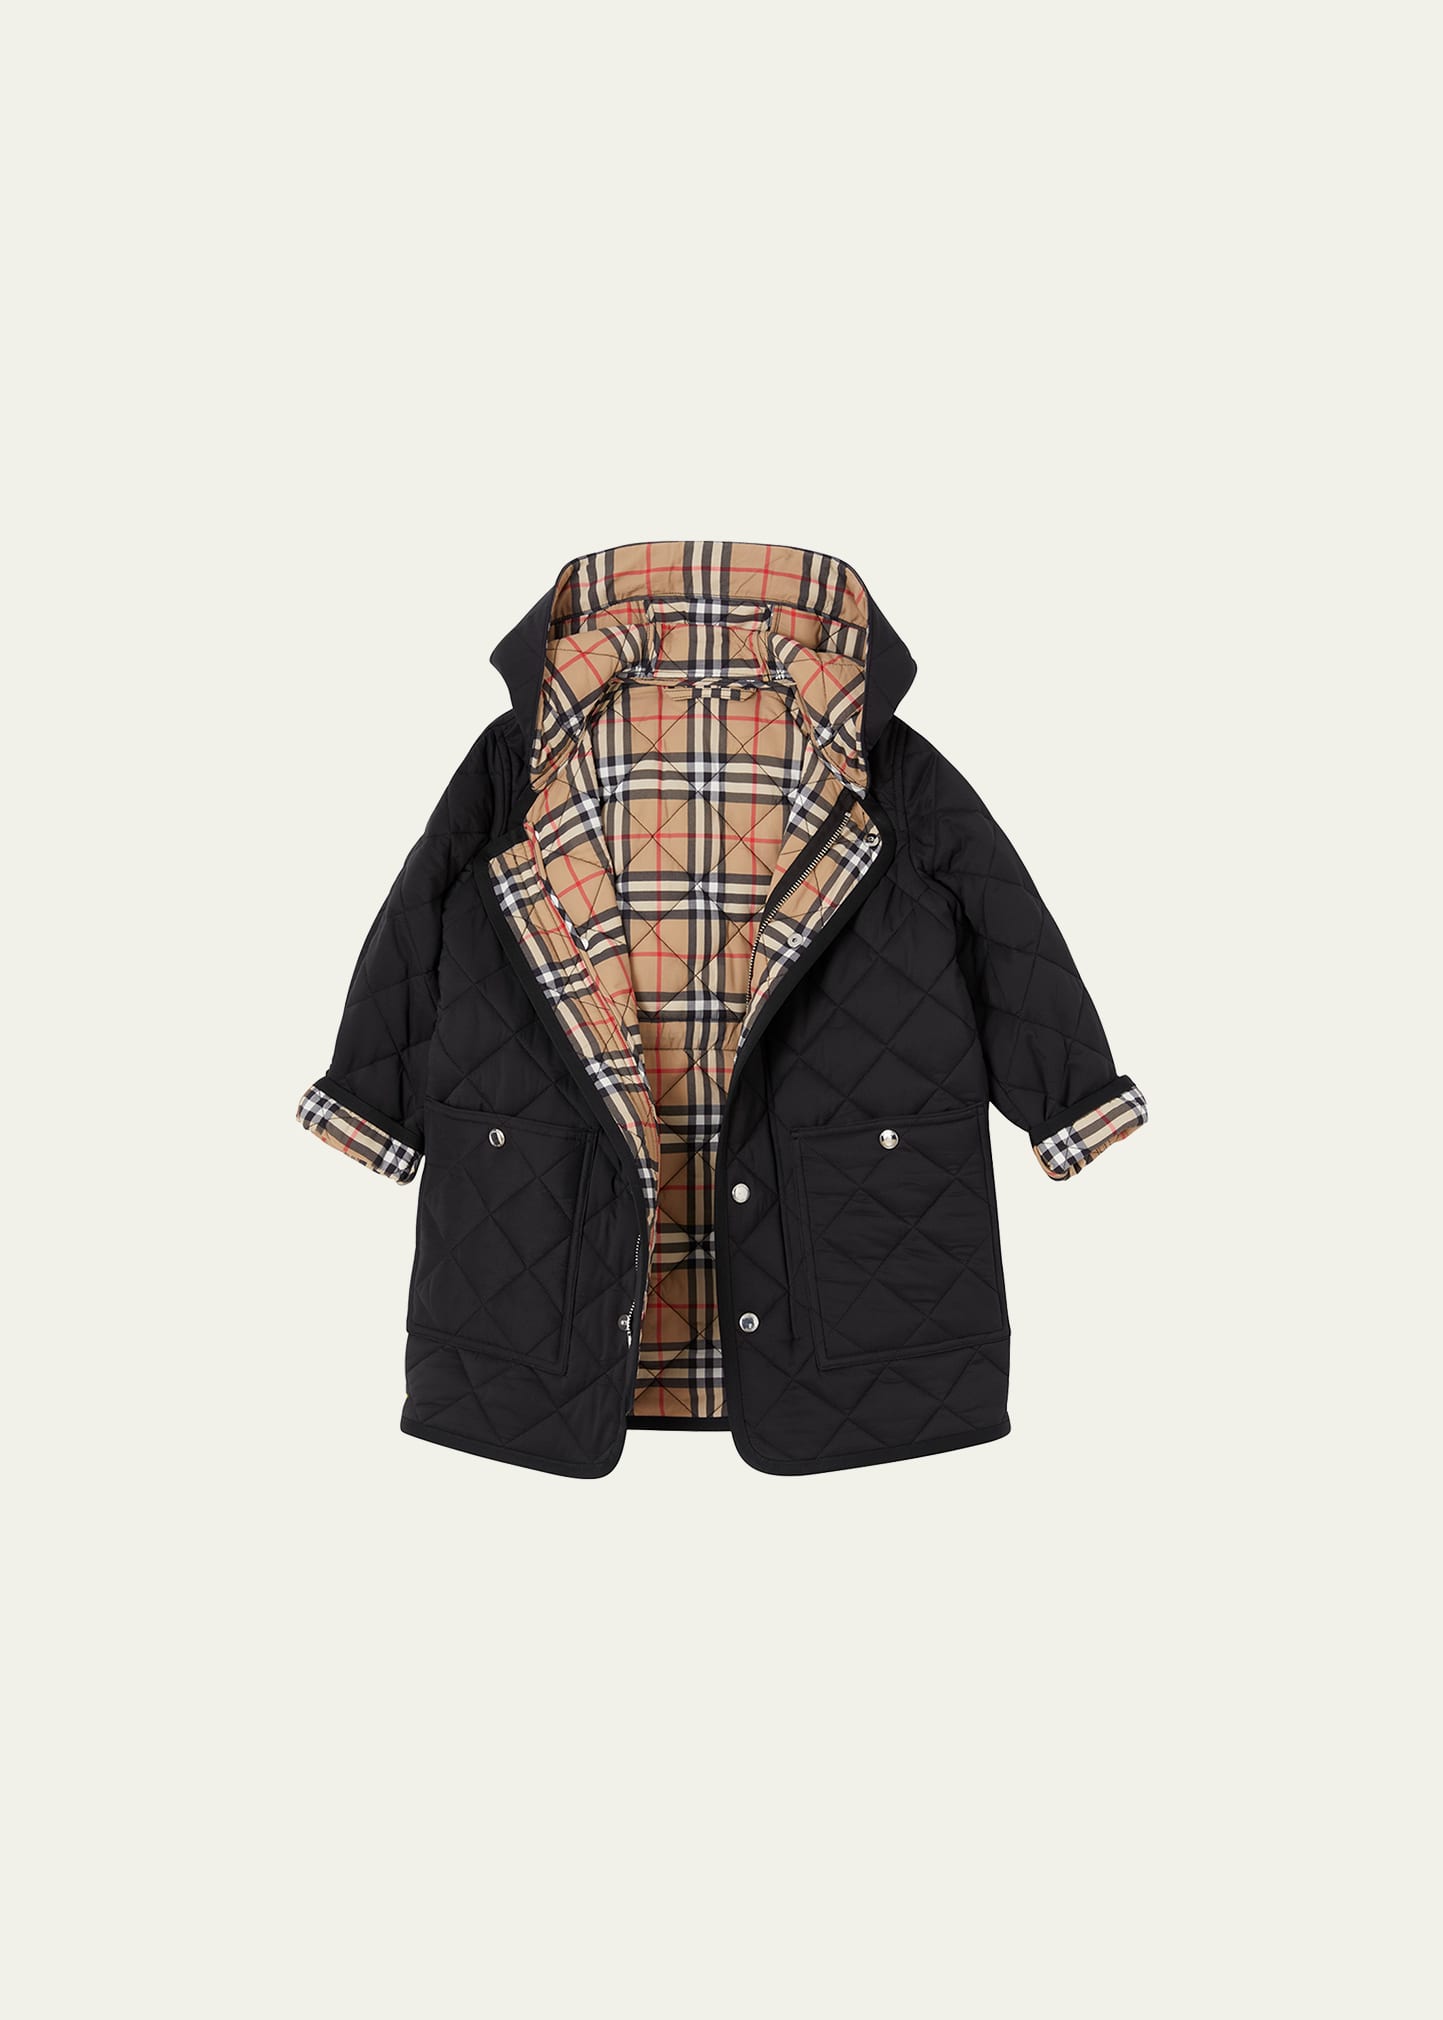 Burberry Kid's Reilly Diamond Quilted Coat, Size 3-14 - Bergdorf Goodman